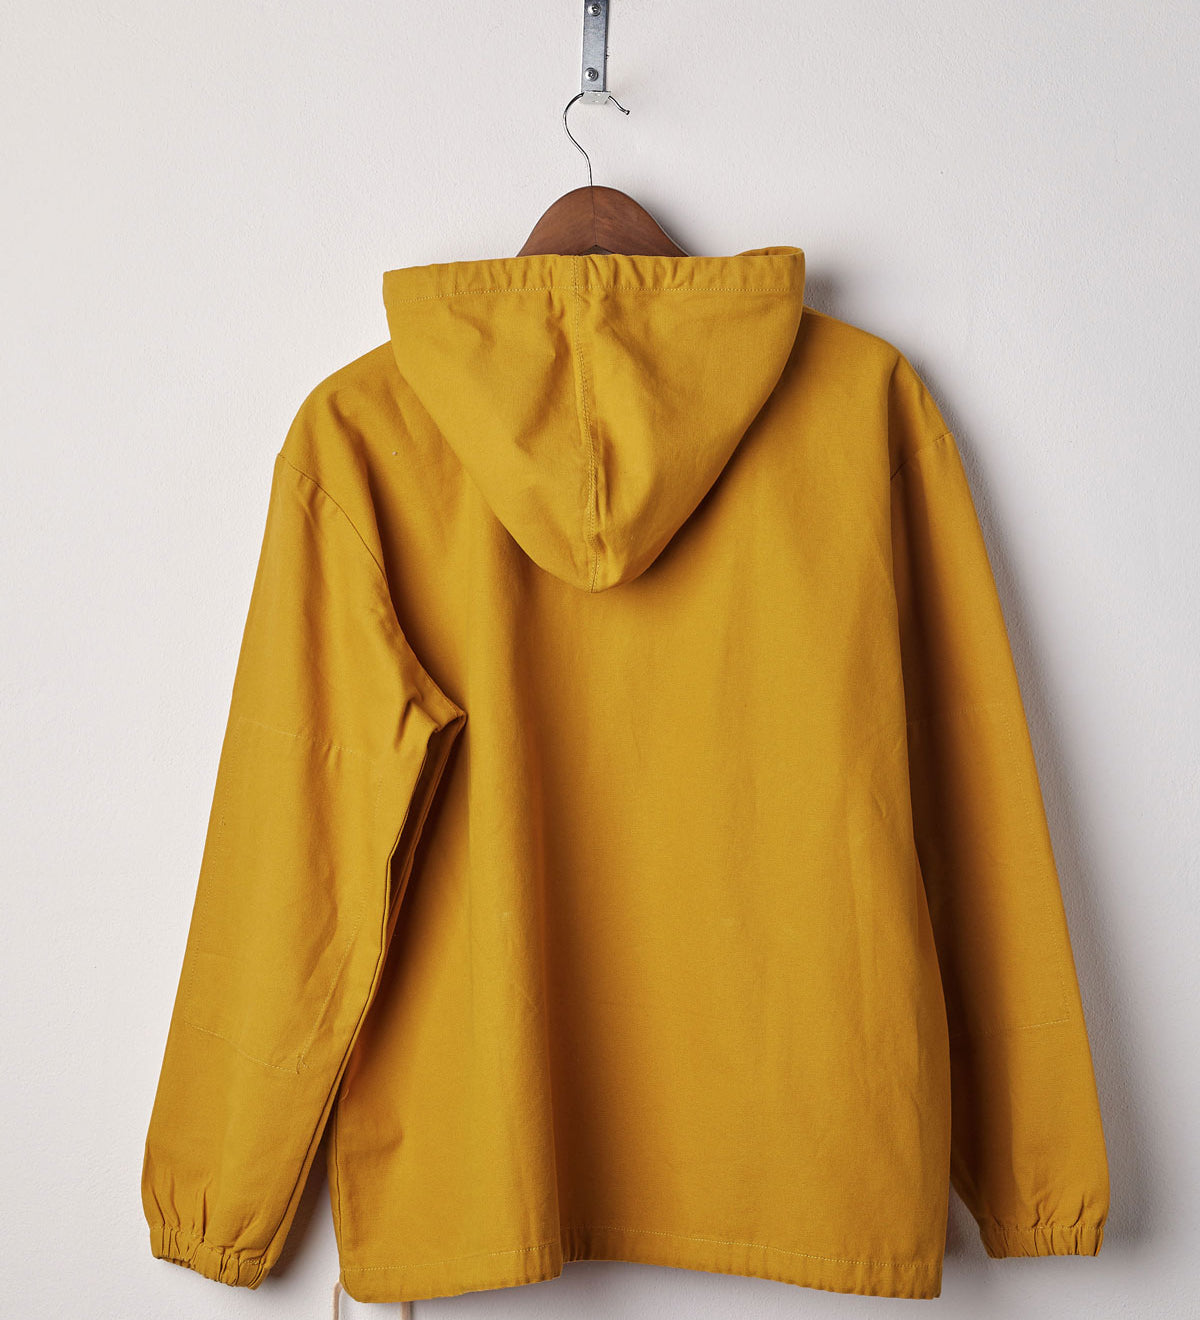 Back view of yellow coloured buttoned smock from Uskees with view of hood. Presented on hanger with white backdrop.